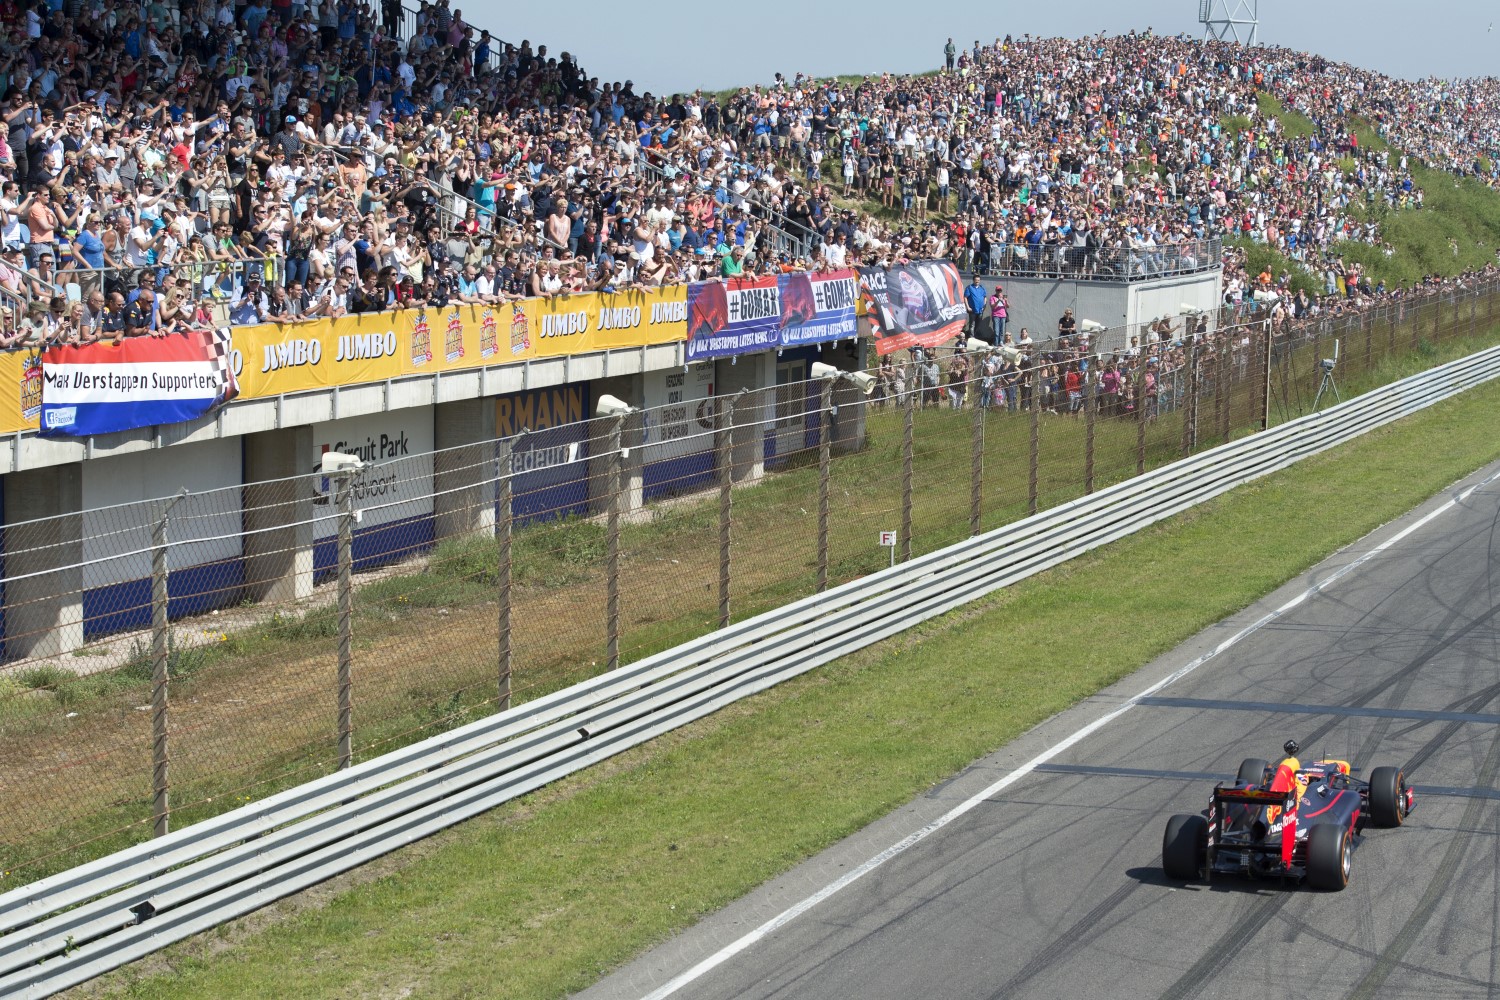 A huge crowd came out to see Verstappen